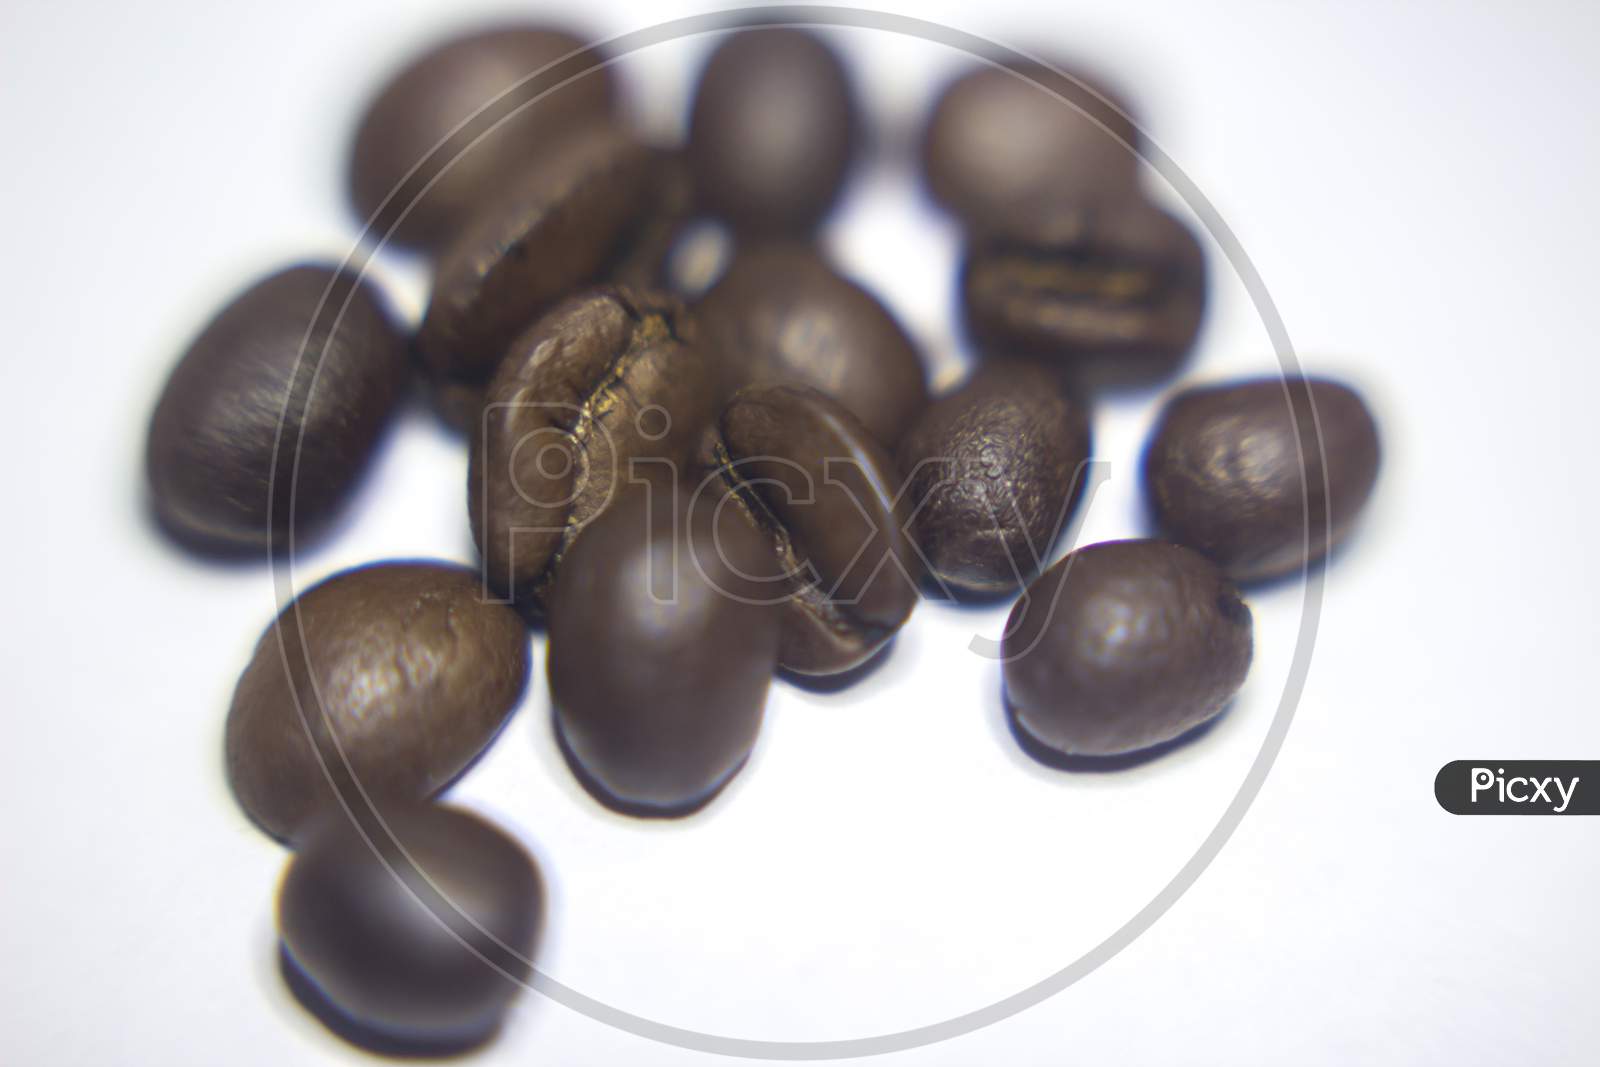 Coffee Beans Isolated On White Background,